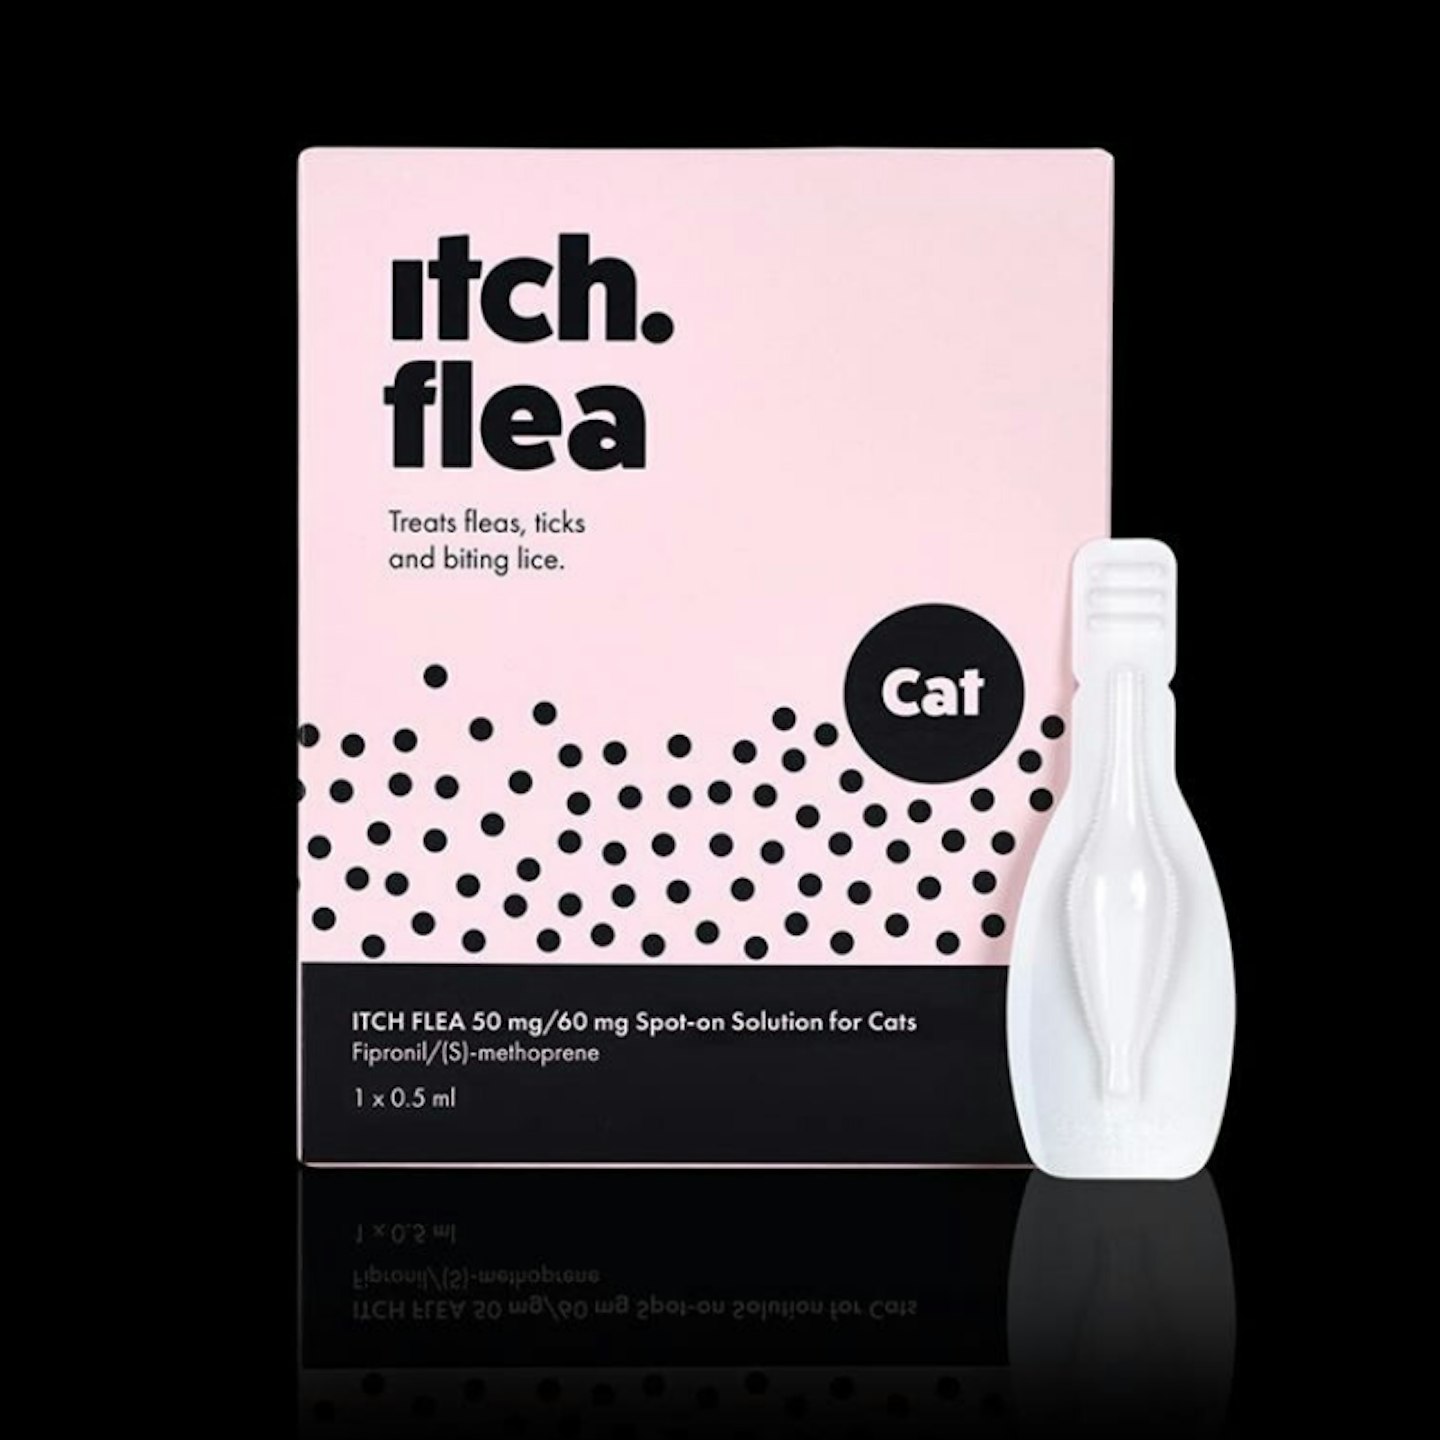 ITCH Pet Subscription